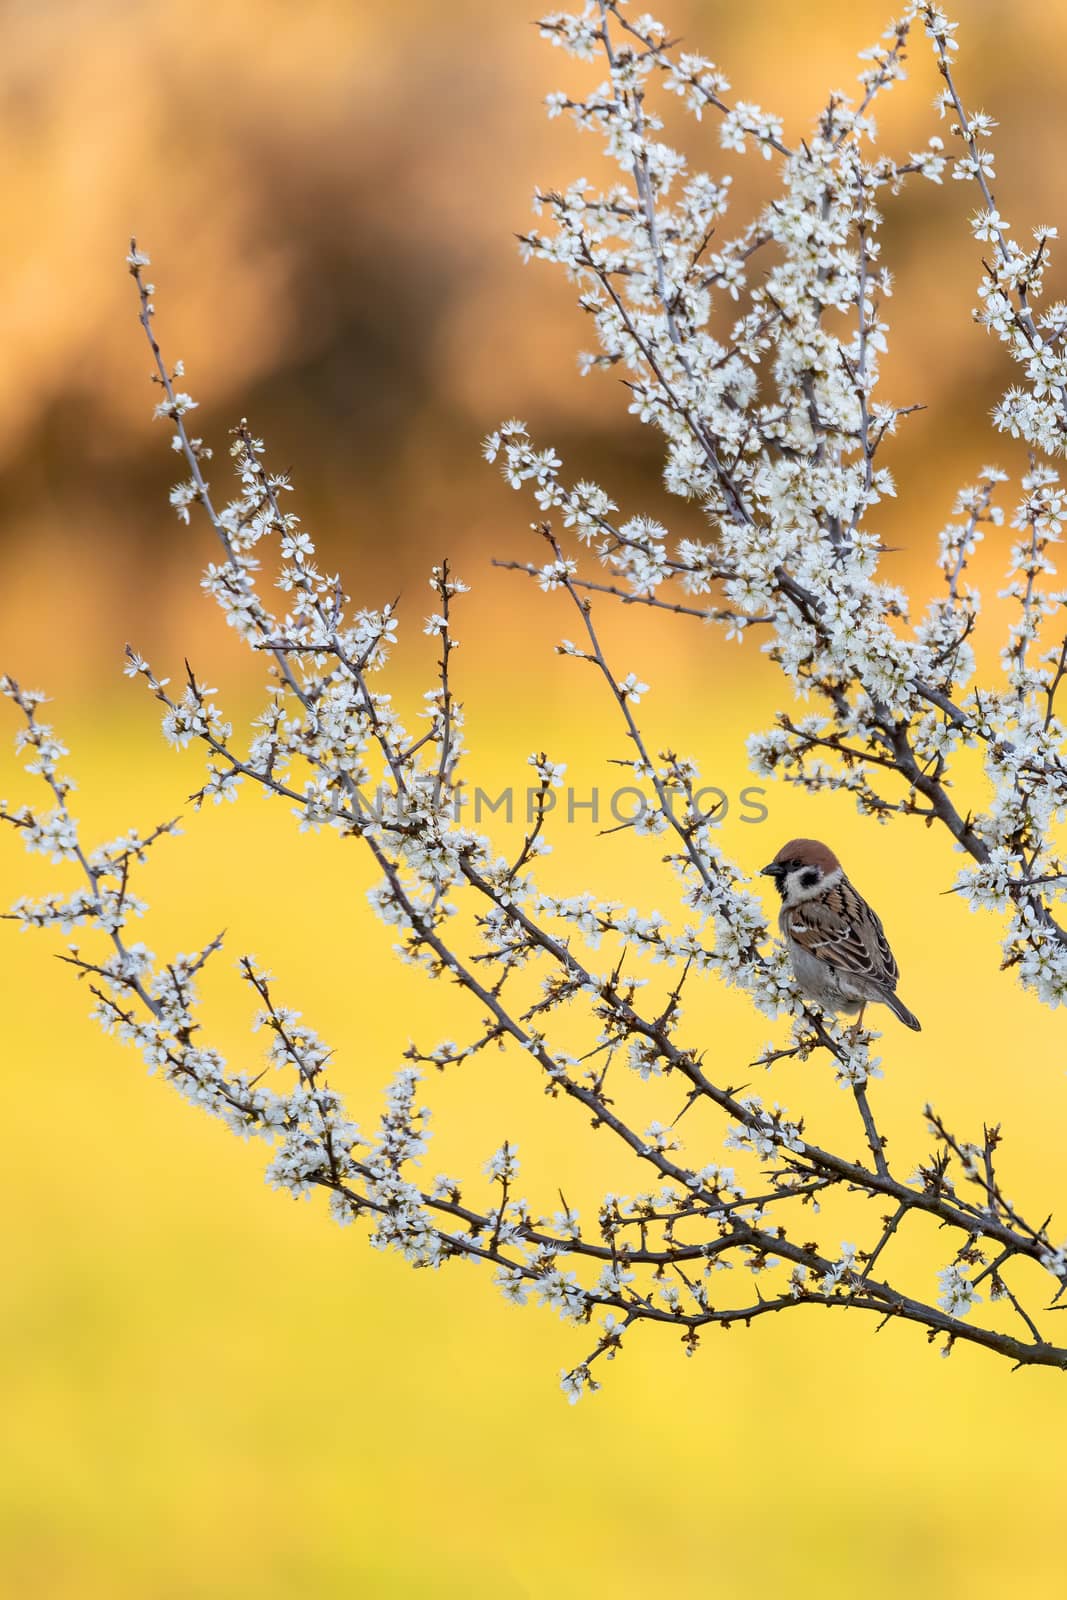 Eurasian tree sparrow (Passer montanus), passerine bird in the sparrow family perched on flowering tree with beautiful blurred yellow background.